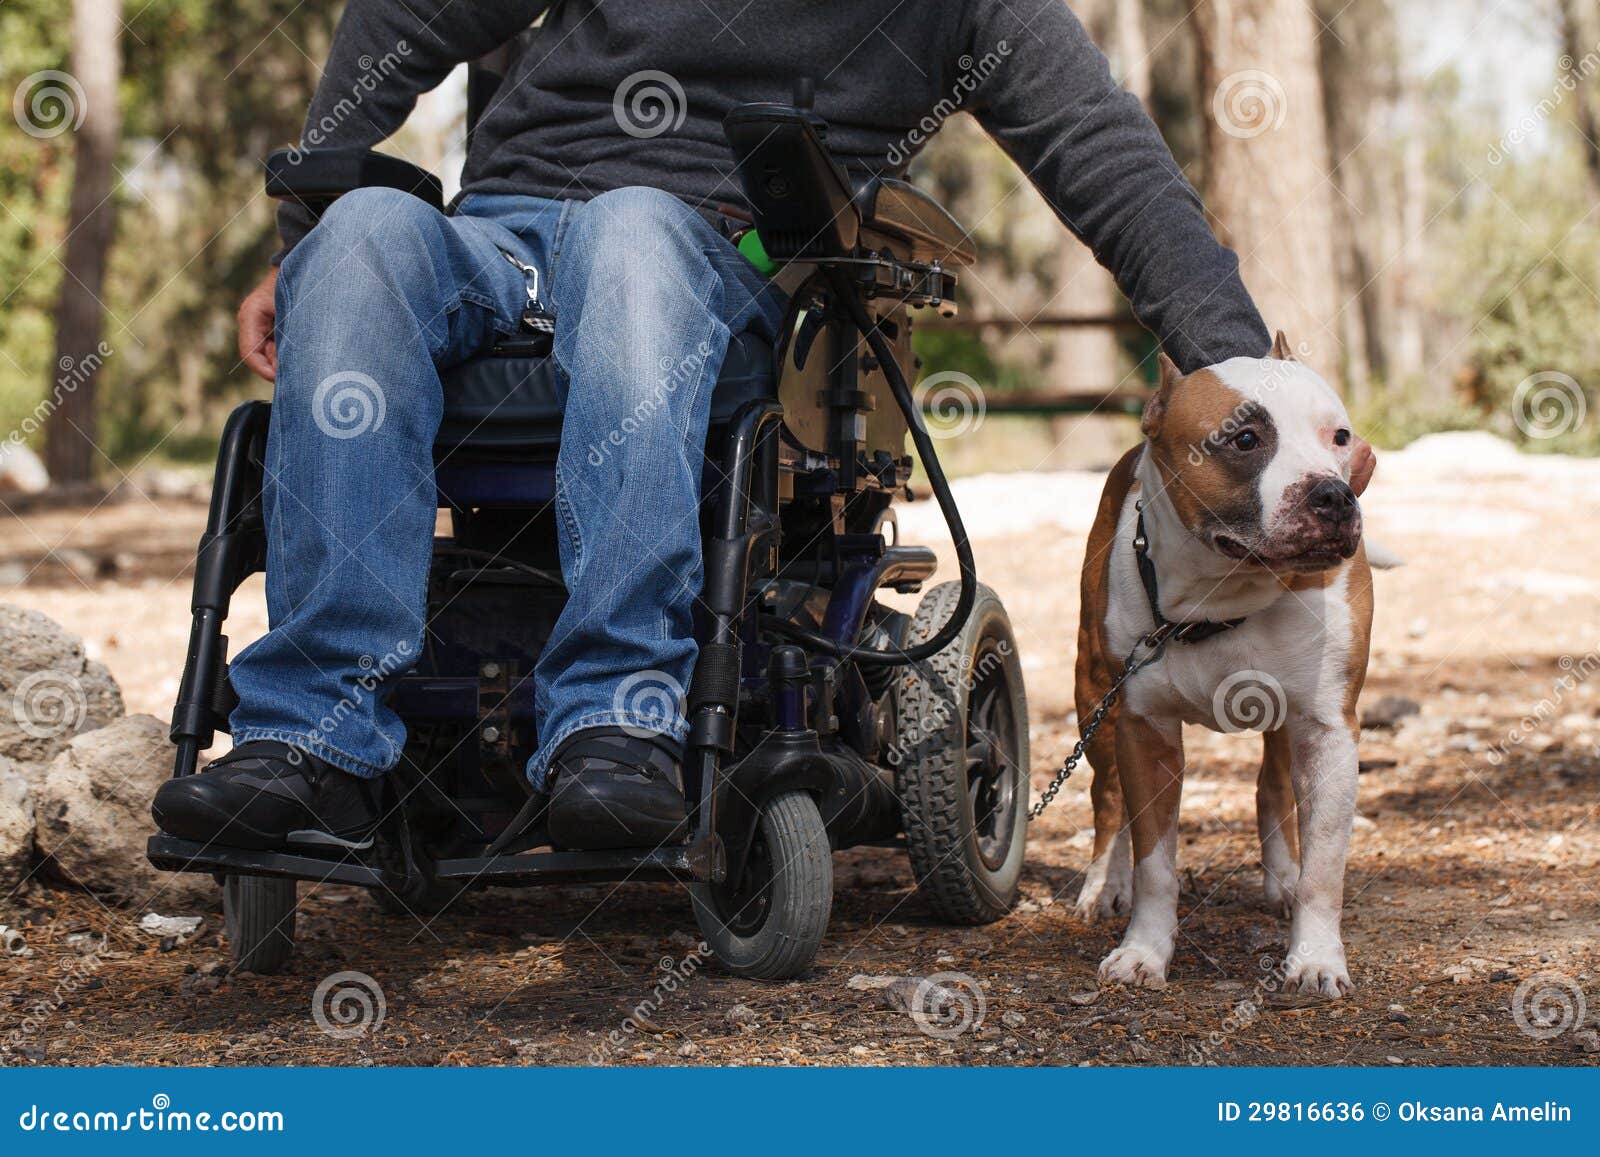 man in a wheelchair with his faithful dog.